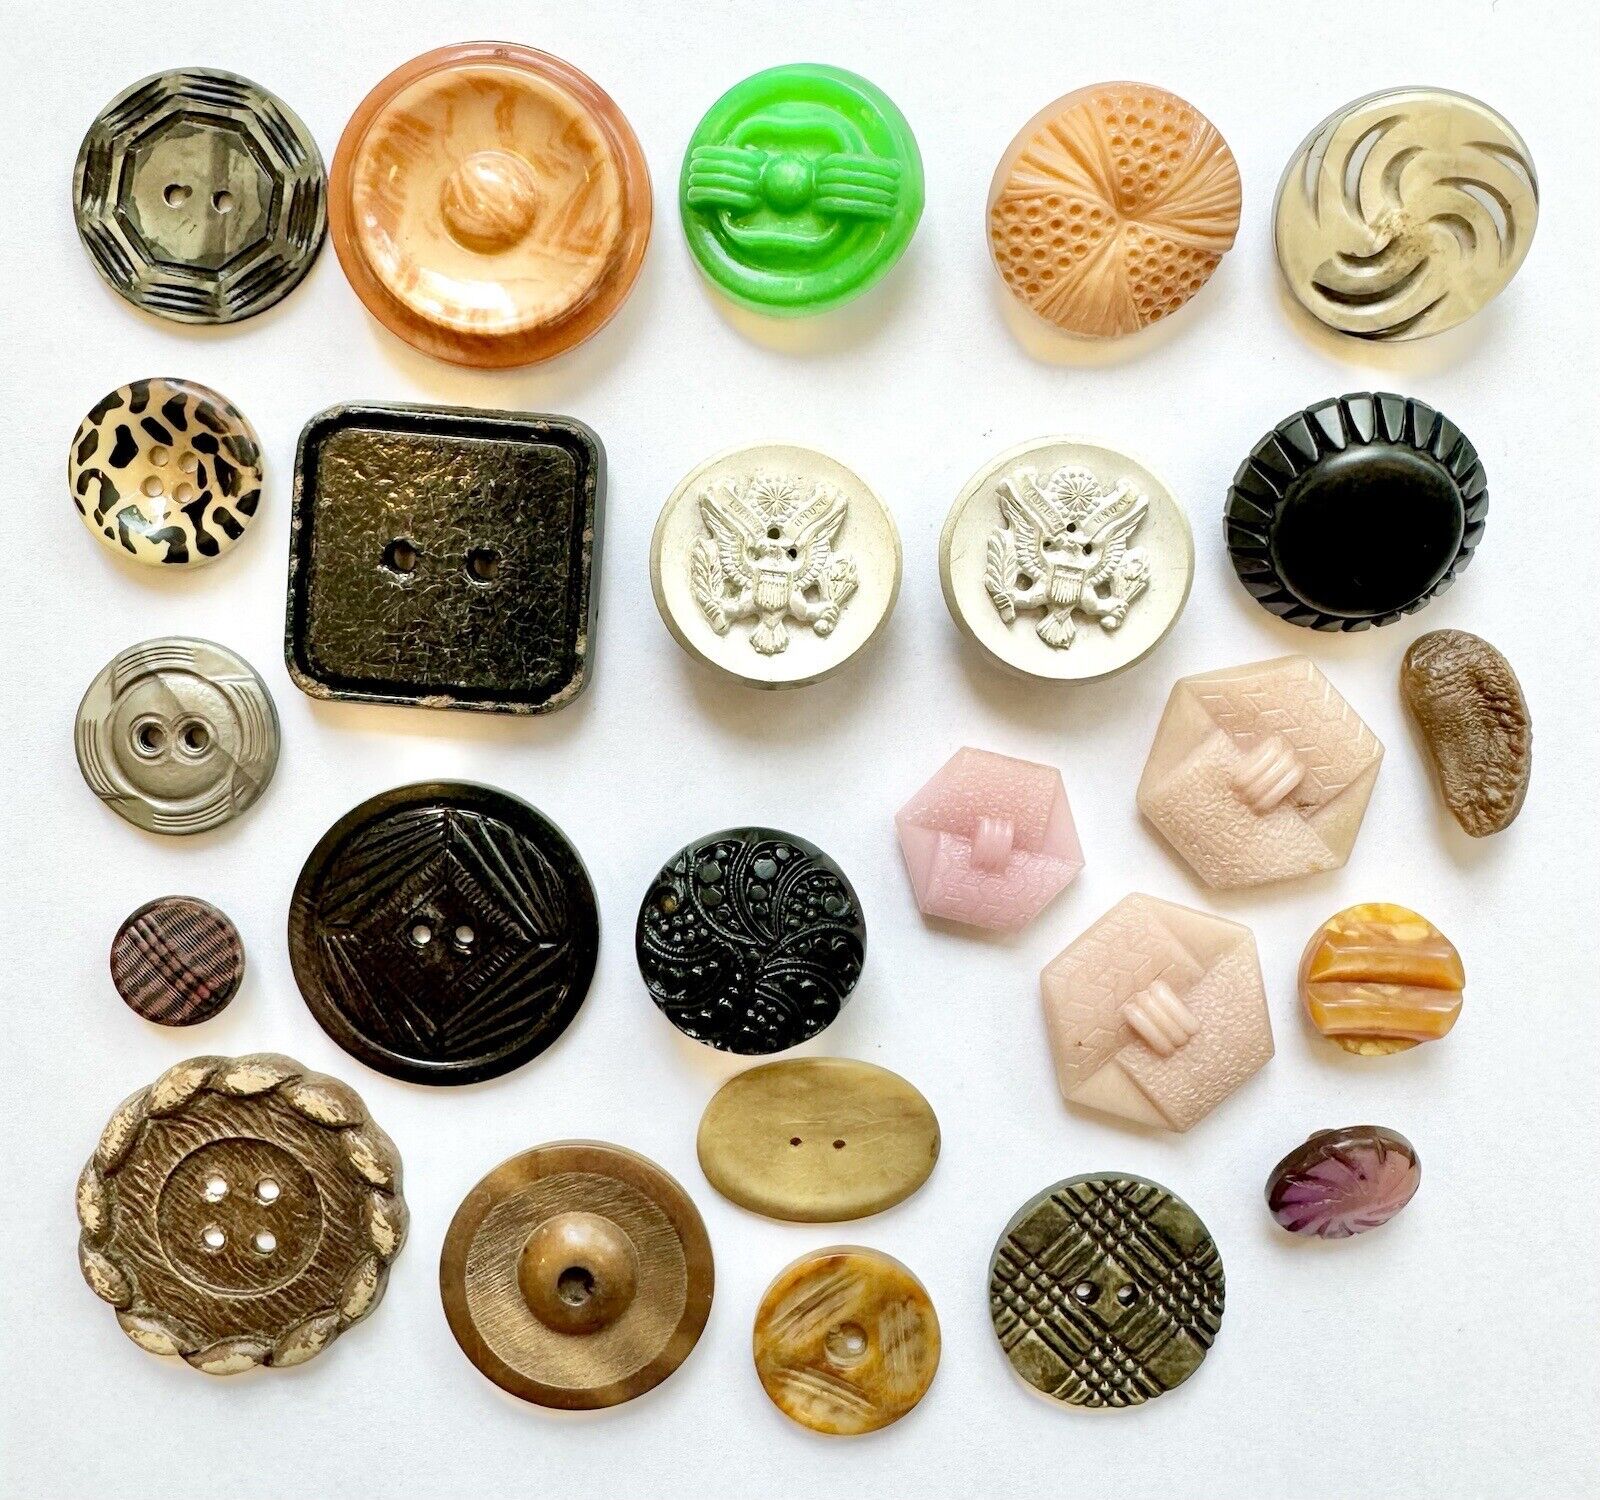 Lot 0f 25 Unusual Plastic Vintage Buttons Celluloid Novelty Shapes Assort Types